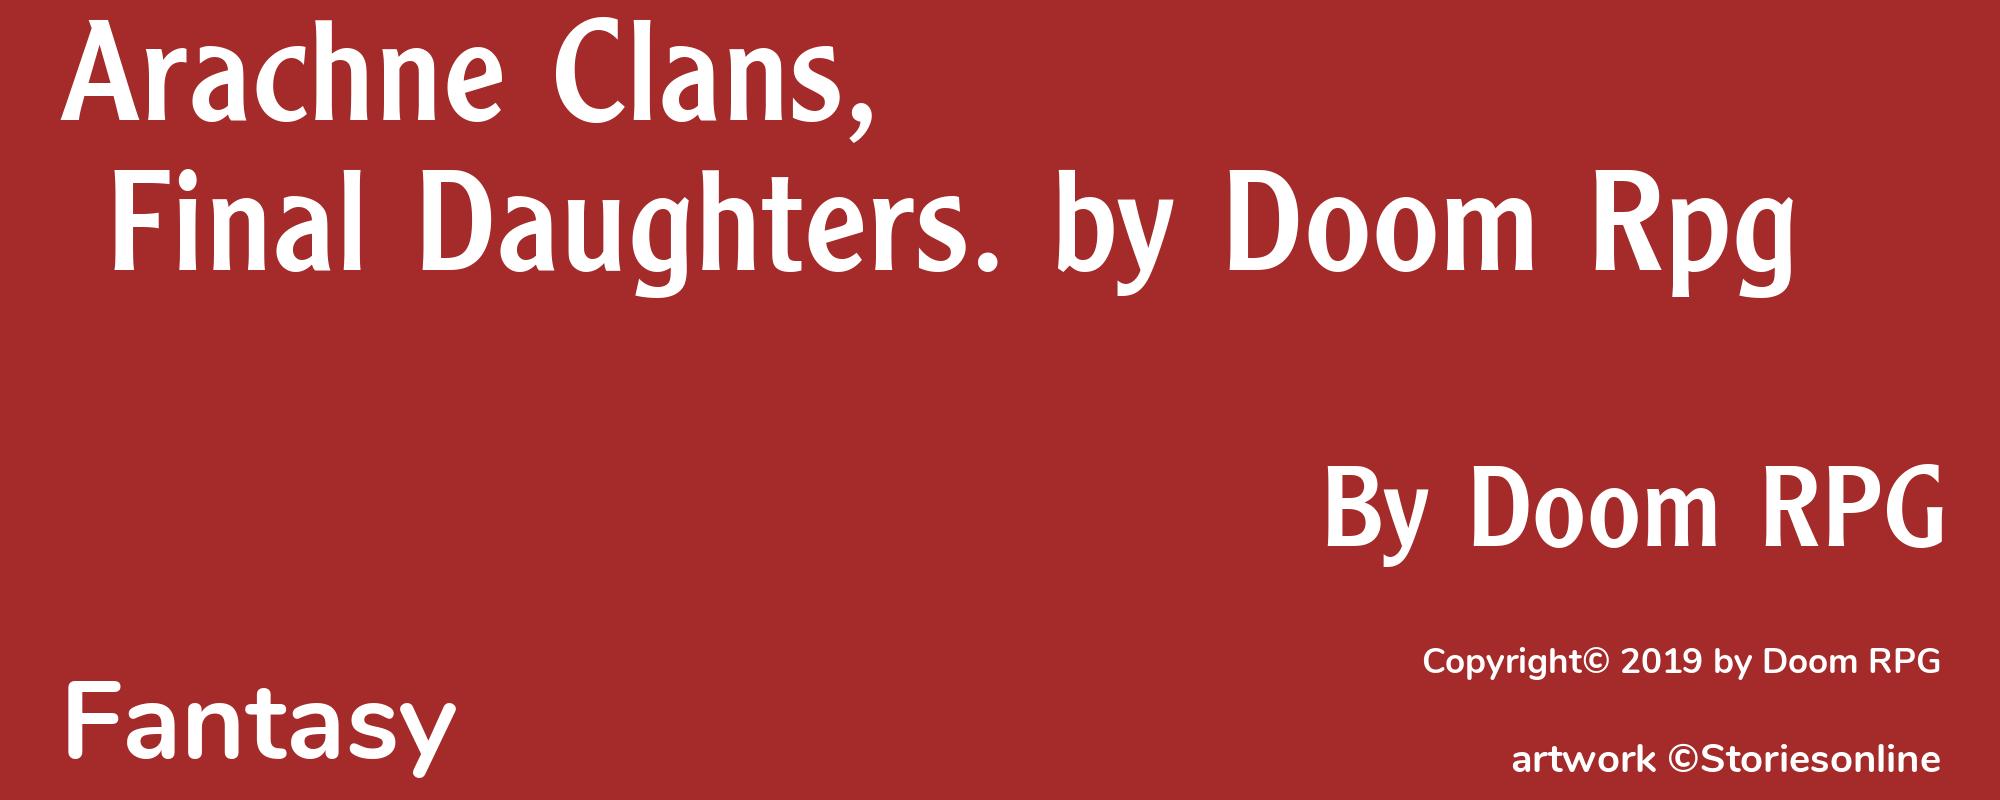 Arachne Clans, Final Daughters. by Doom Rpg - Cover